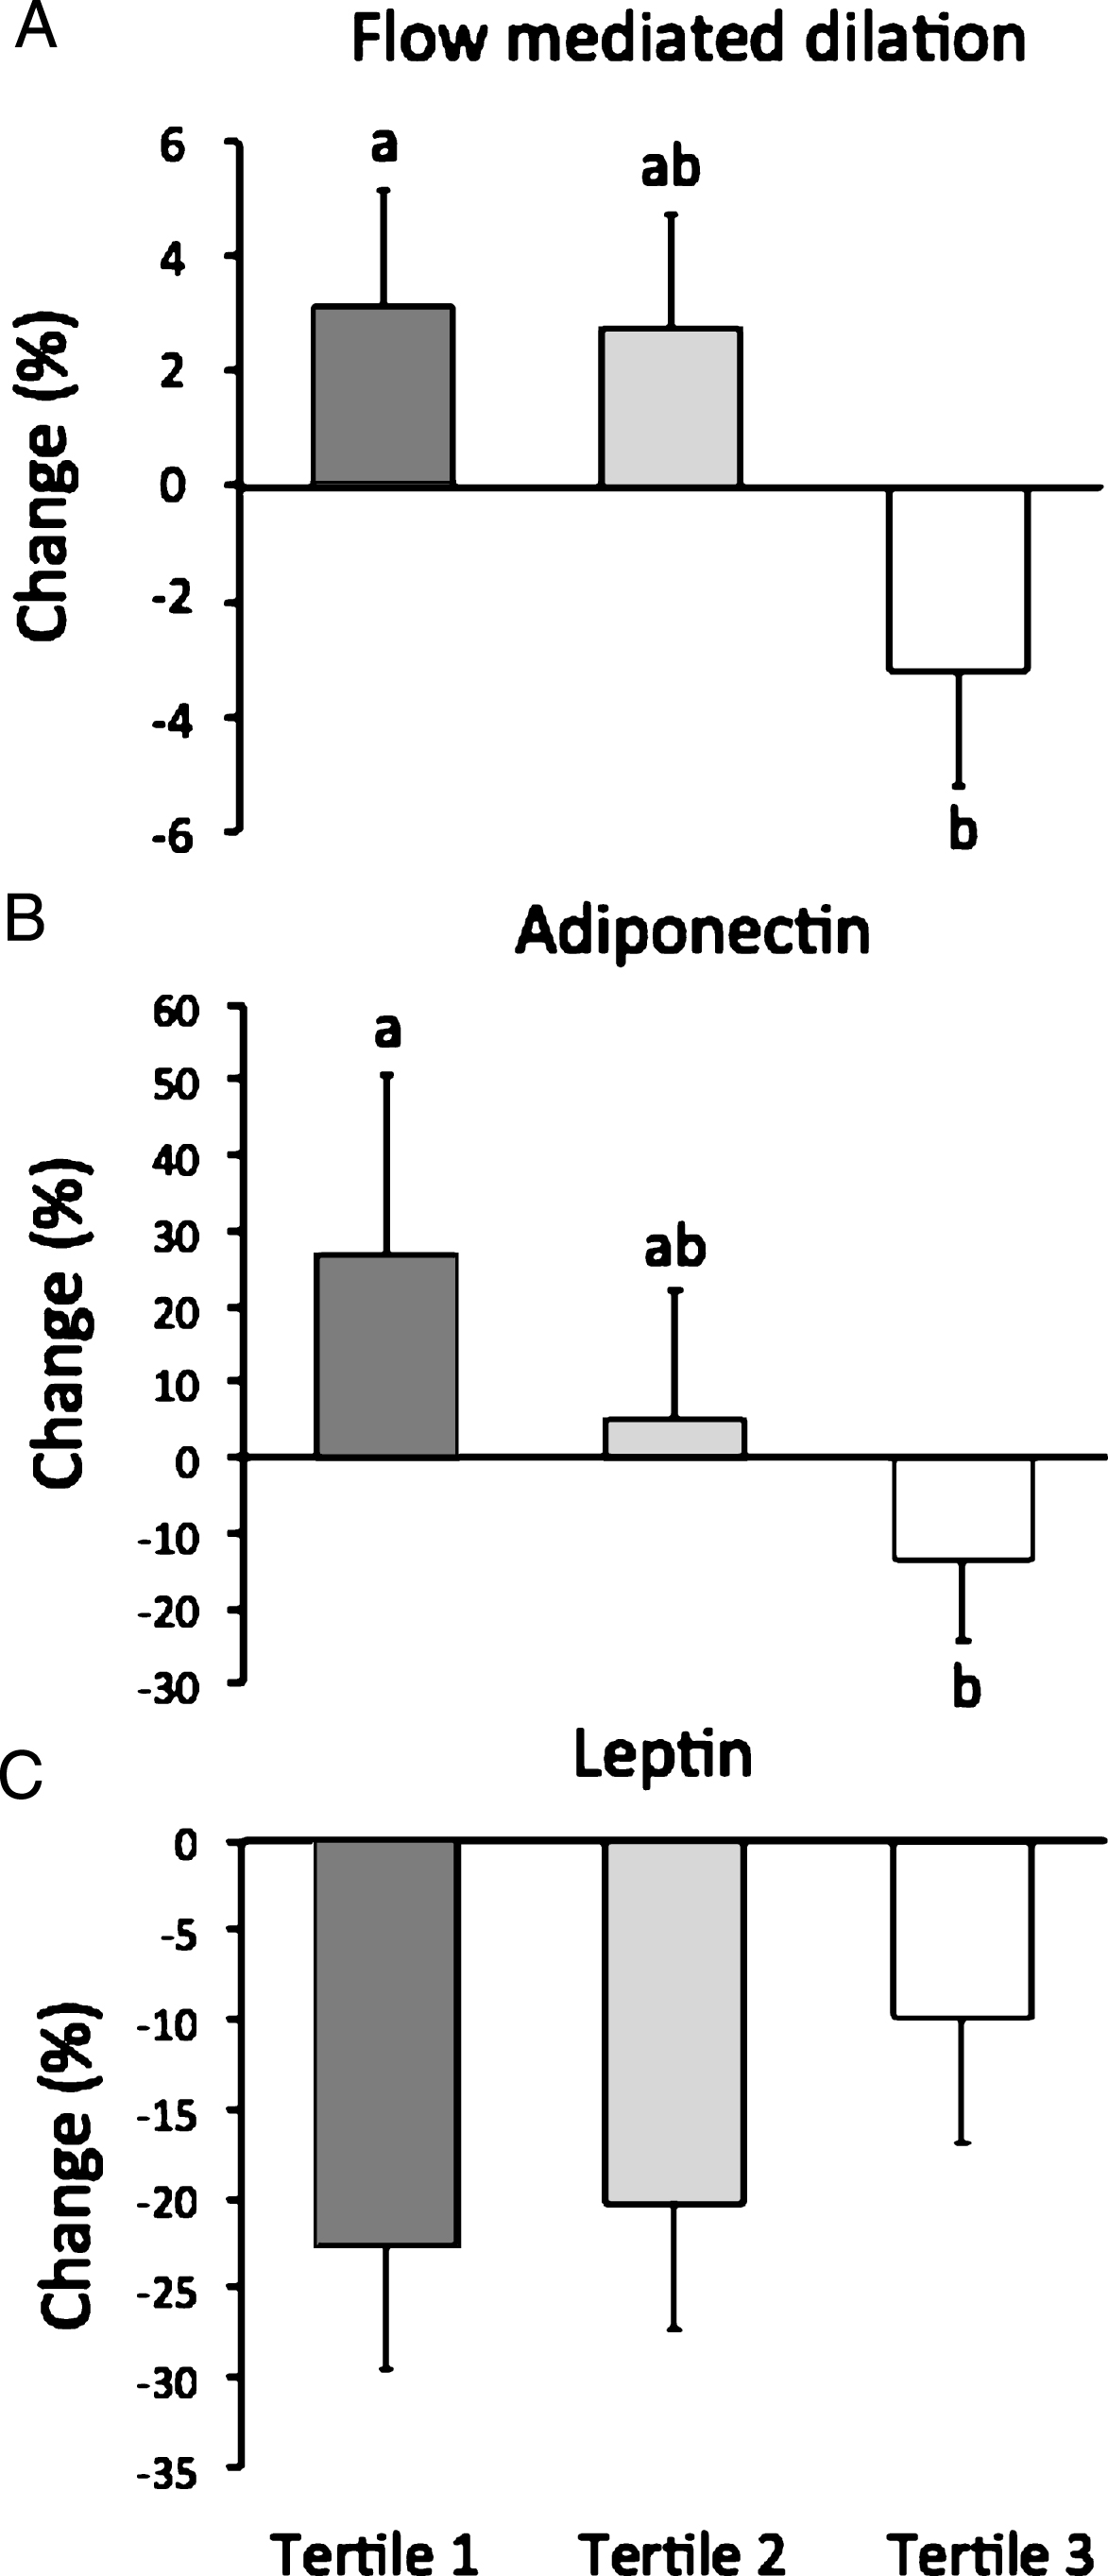 Flow mediated dilation, adiponectin, and leptin after 8 weeks of ADF by tertile of insulin resistance. Values reportedas mean±SEM. Tertile 1 (n = 18) HOMA-IR range 0.8–2.4, Tertile 2 (n = 18) HOMA-IR range 2.5–3.6, Tertile 3 (n = 18) HOMA-IR range 3.7–12.4. A. Change in FMD differed (P < 0.05) between tertile 1 and 3. B. Change in adiponectin differed (P < 0.05) between tertile 1 and 3. C. Change in leptin did not differ between tertiles.